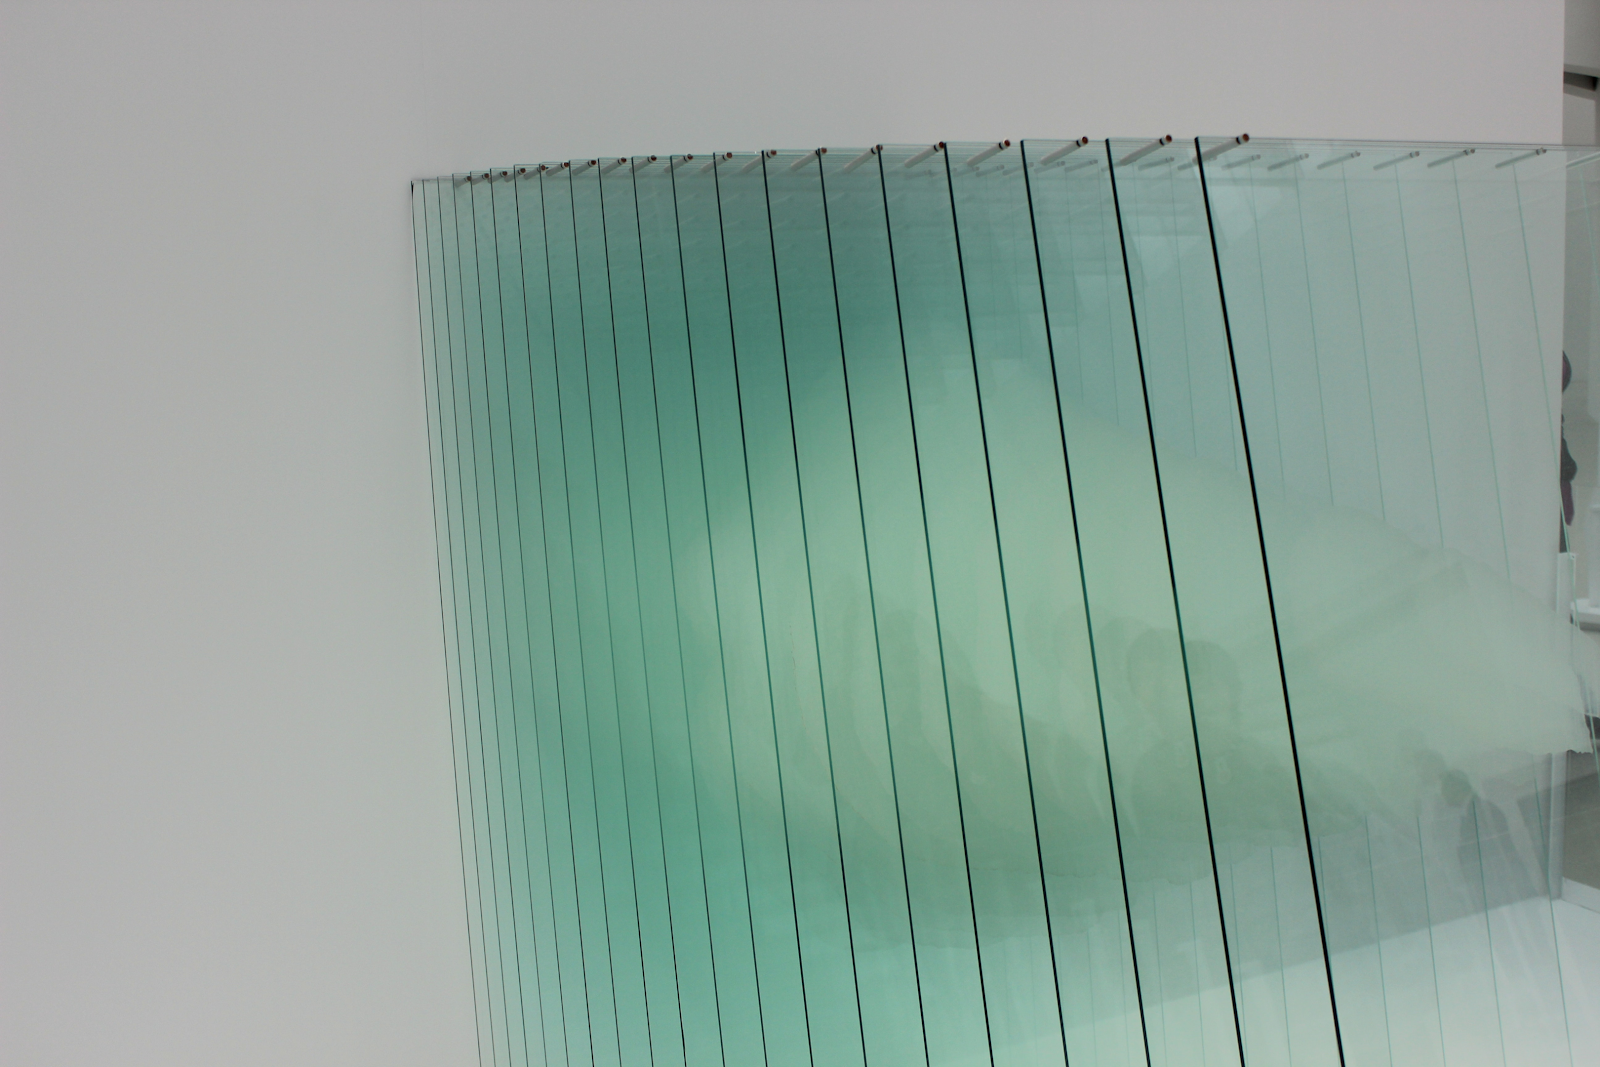 Working with acrylic vs polycarbonate is not as similar as it may look.